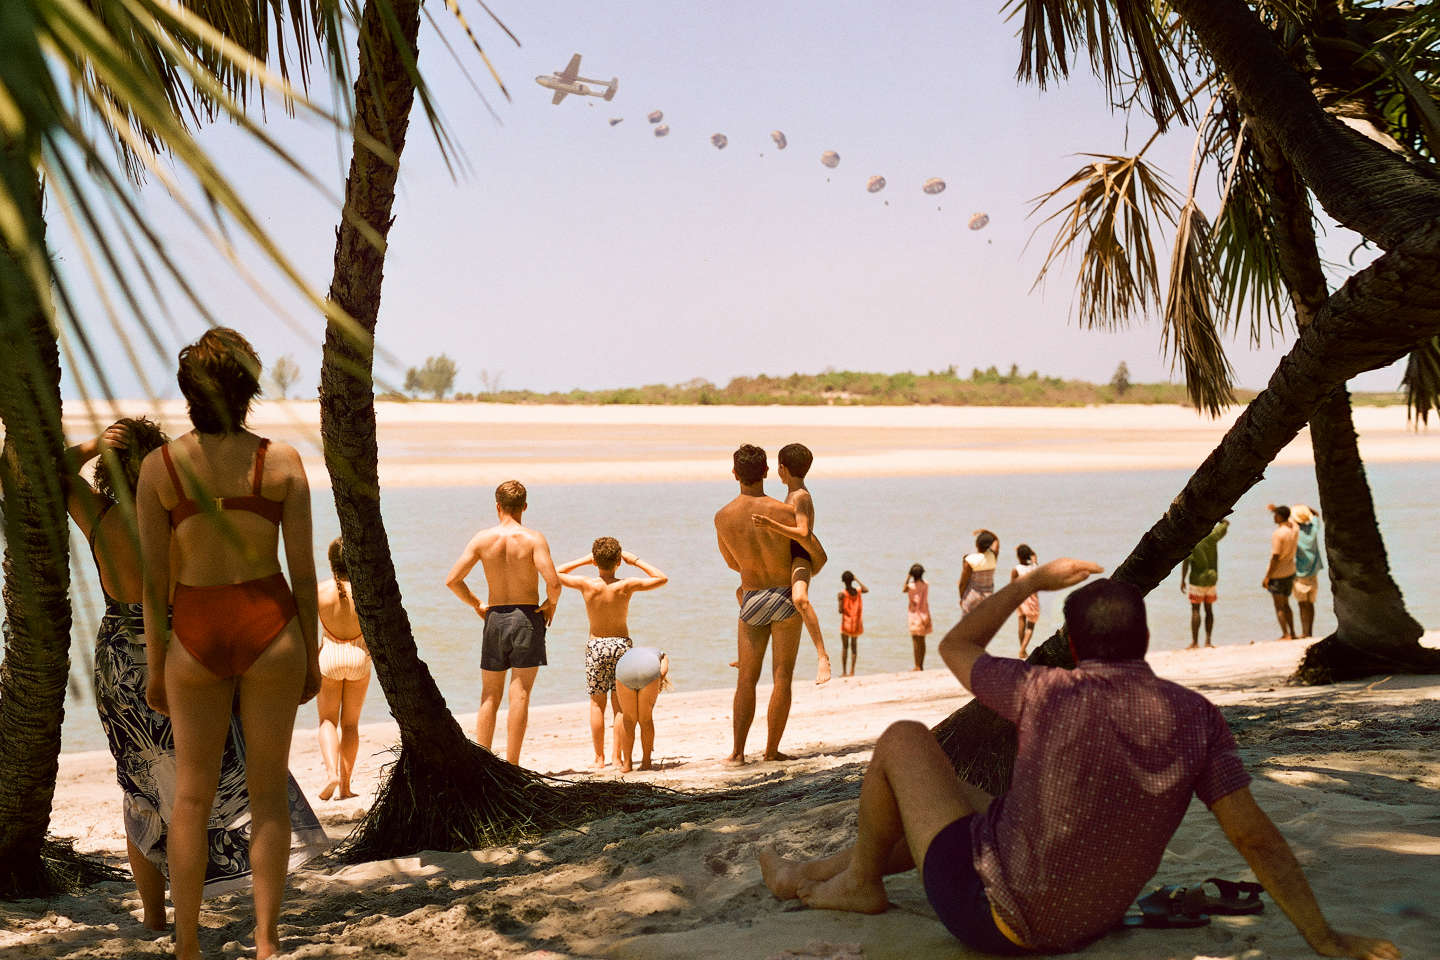 “The Red Island”, by Robin Campillo: a childhood in Madagascar in the 1970s